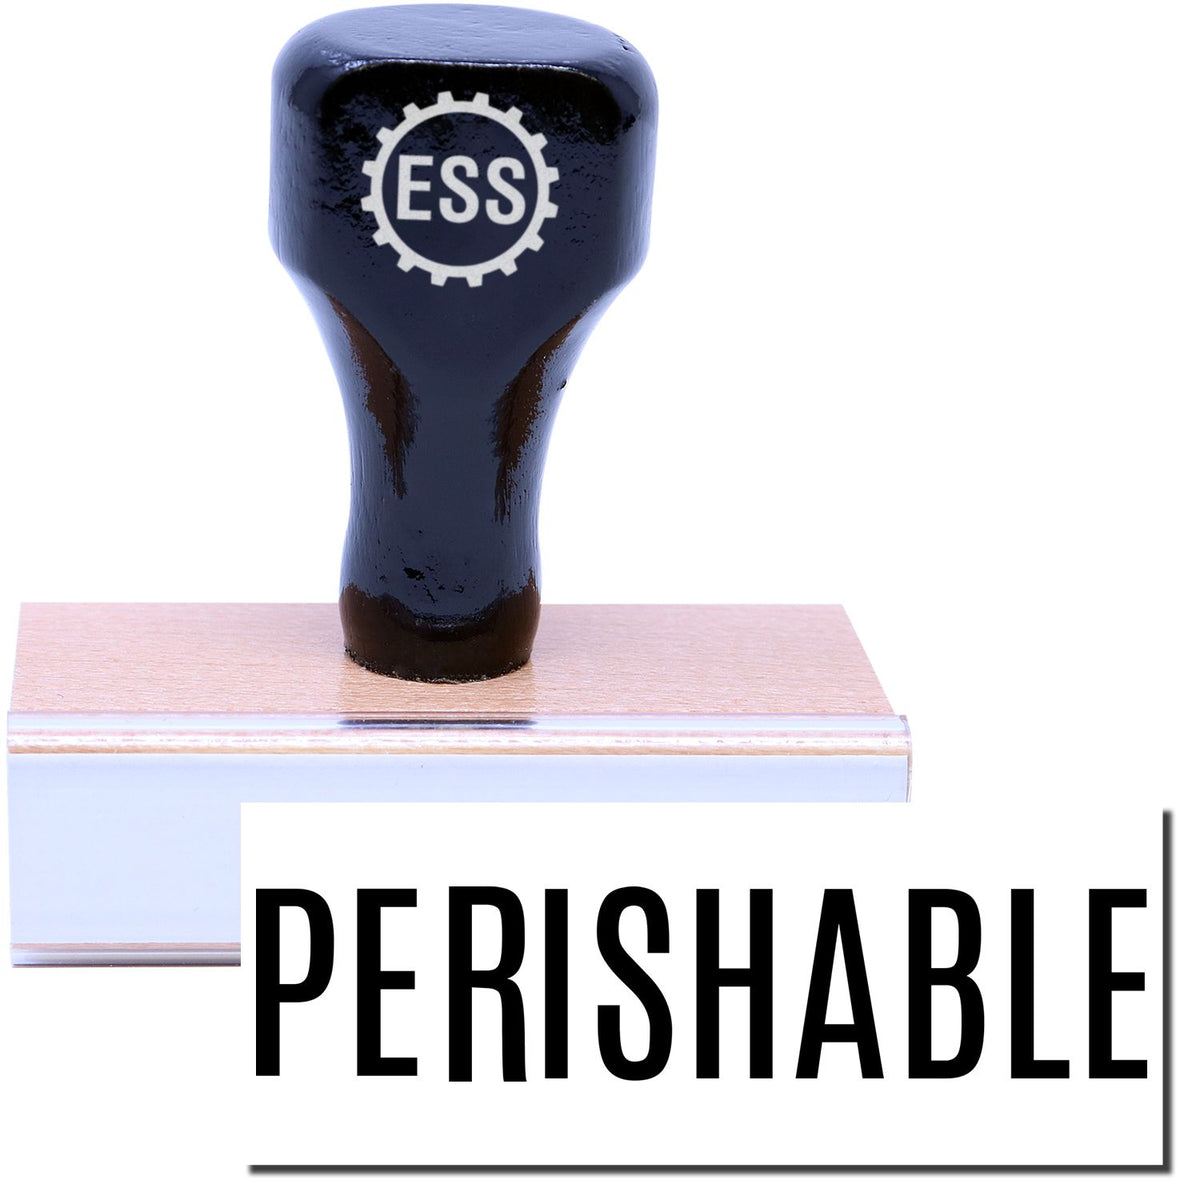 A stock office rubber stamp with a stamped image showing how the text &quot;PERISHABLE&quot; is displayed after stamping.